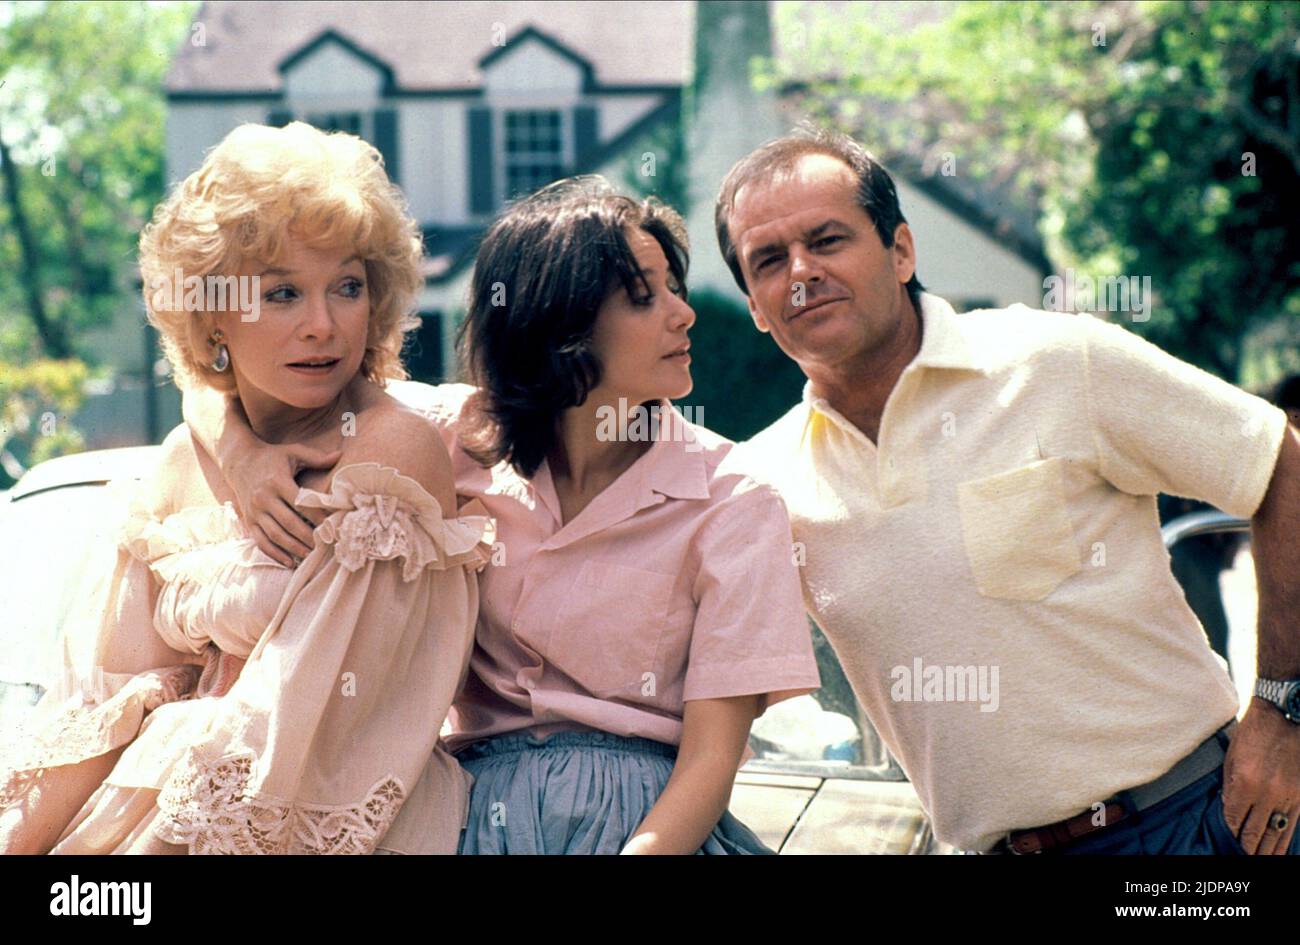 MACLAINE,WINGER,NICHOLSON, TERMS OF ENDEARMENT, 1983 Stock Photo